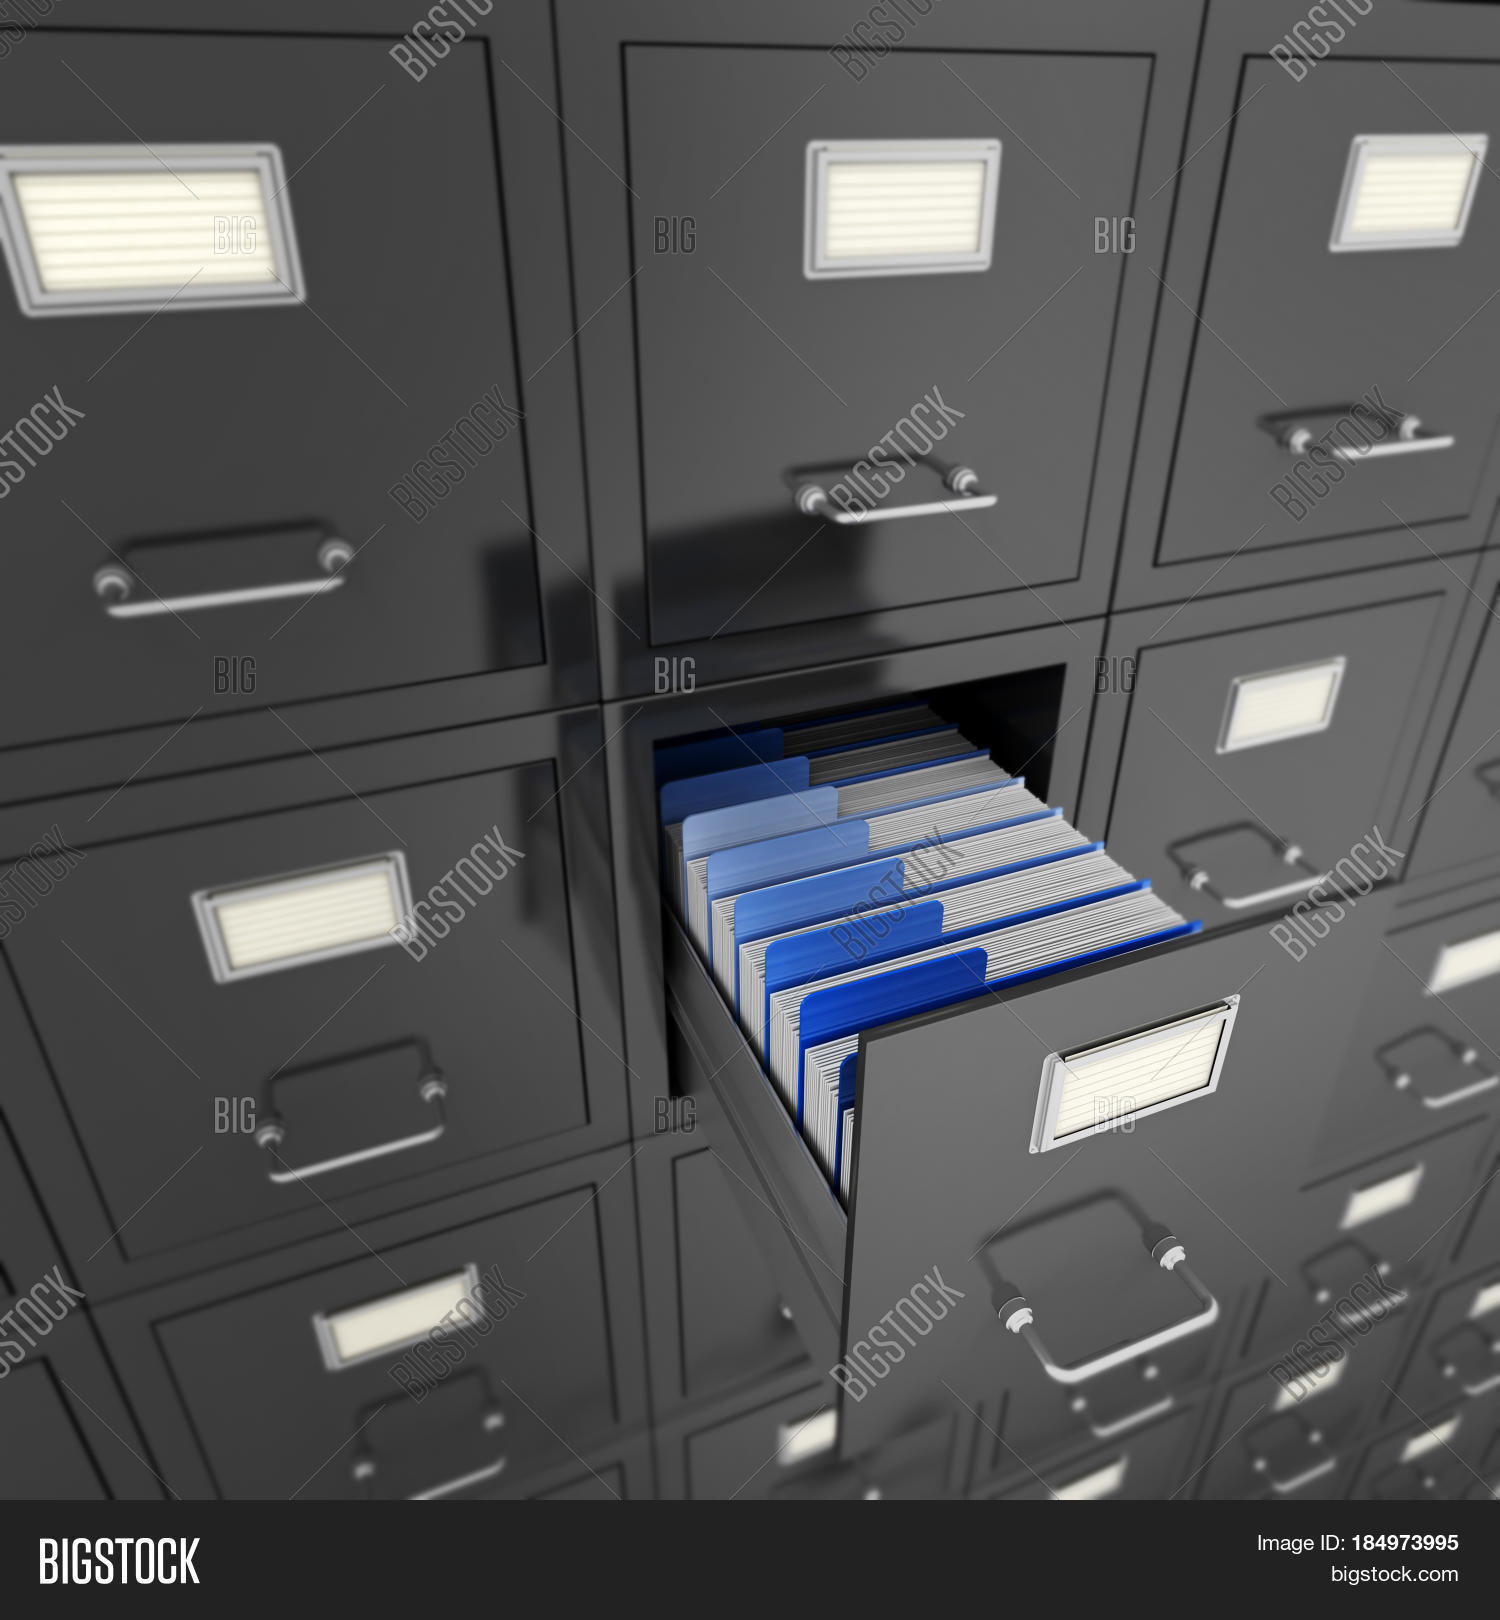 Huge File Cabinet Open Image Photo Free Trial Bigstock throughout proportions 1500 X 1620